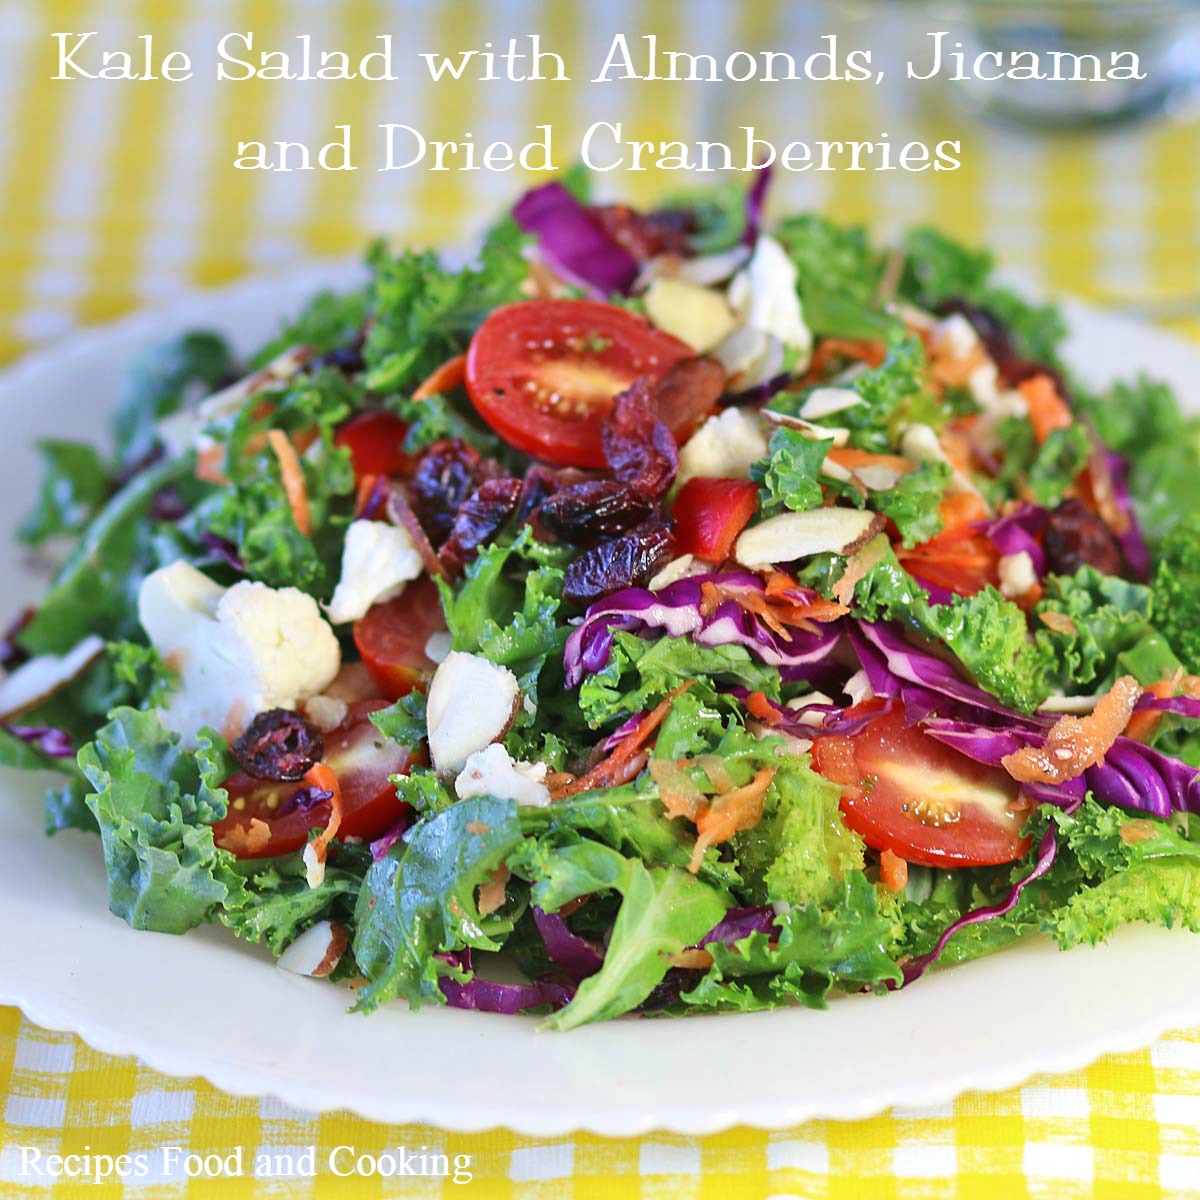 Kale Salad with Almonds, Jicama and Dried Cranberries